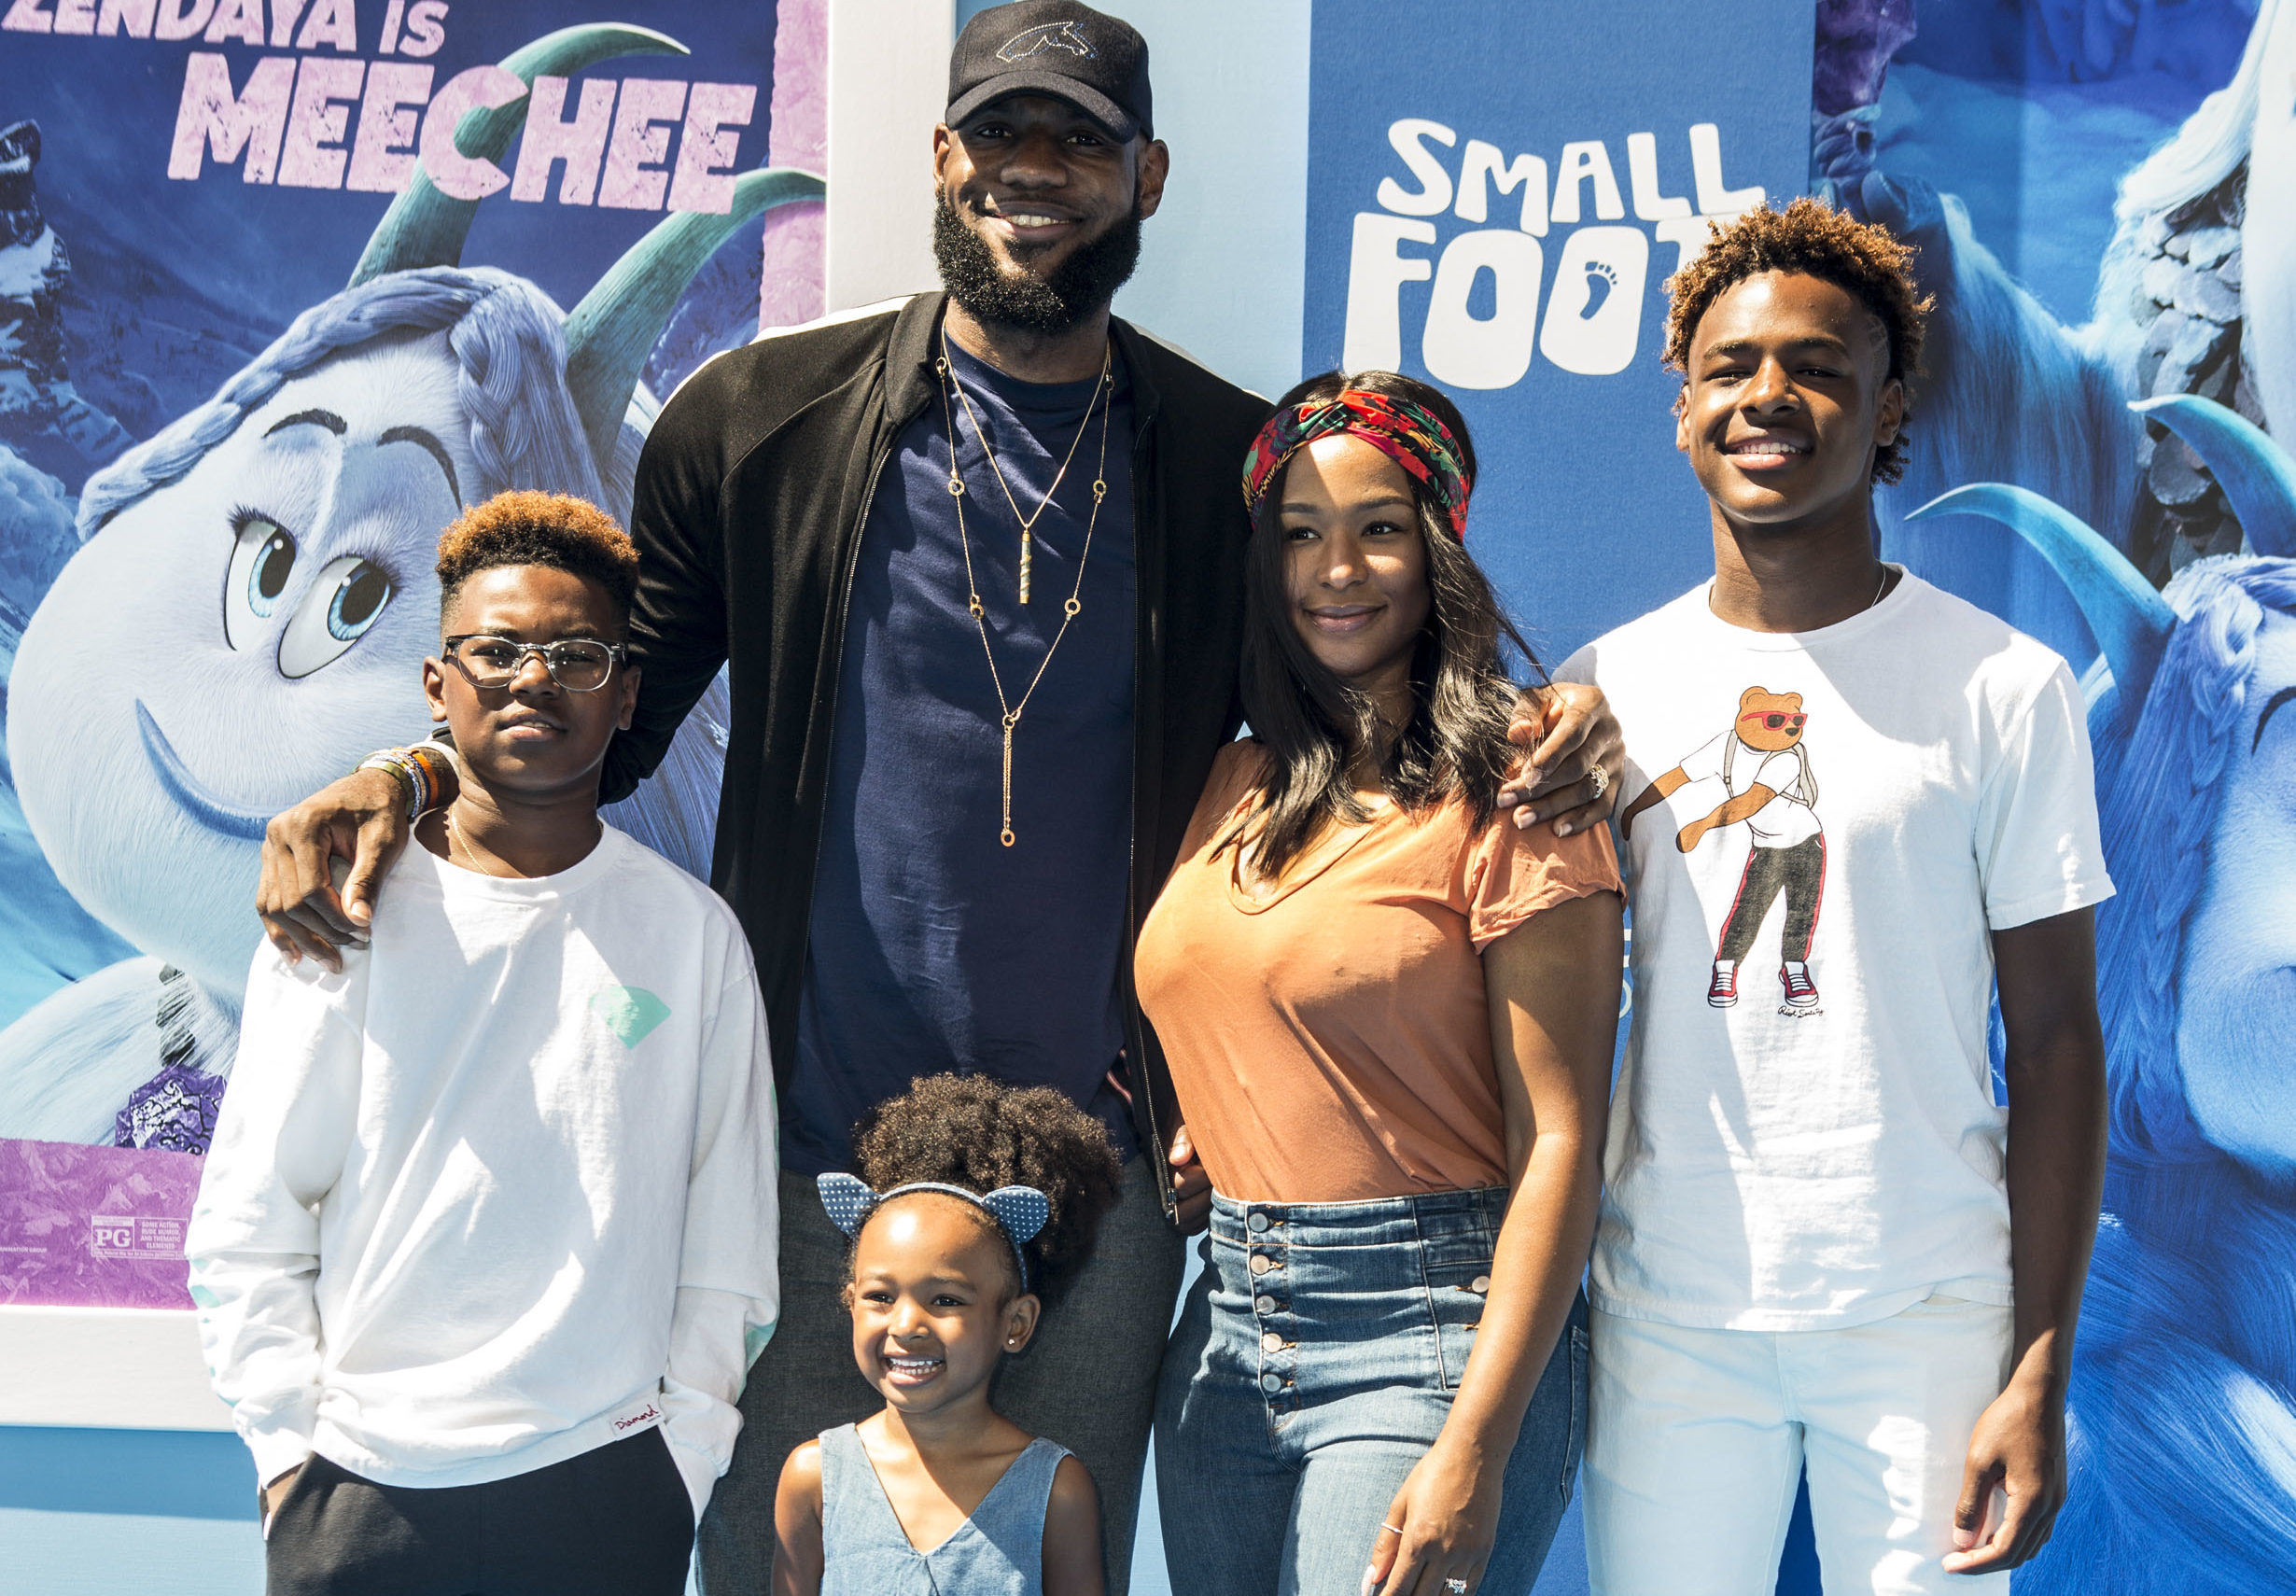 LeBron James and his family